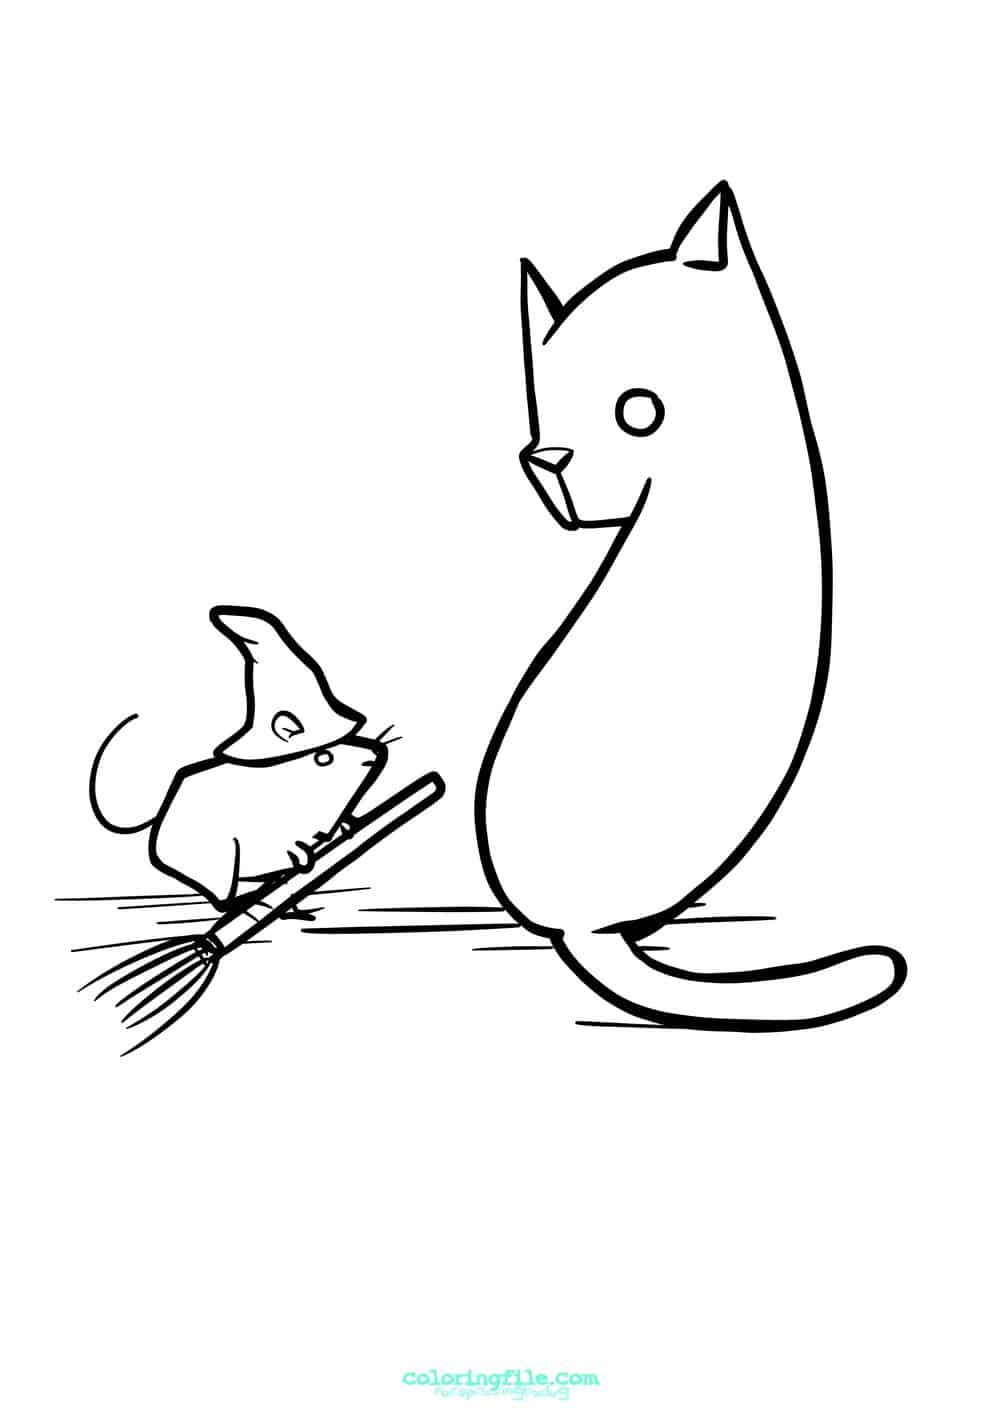 Halloween cat and mice coloring pages